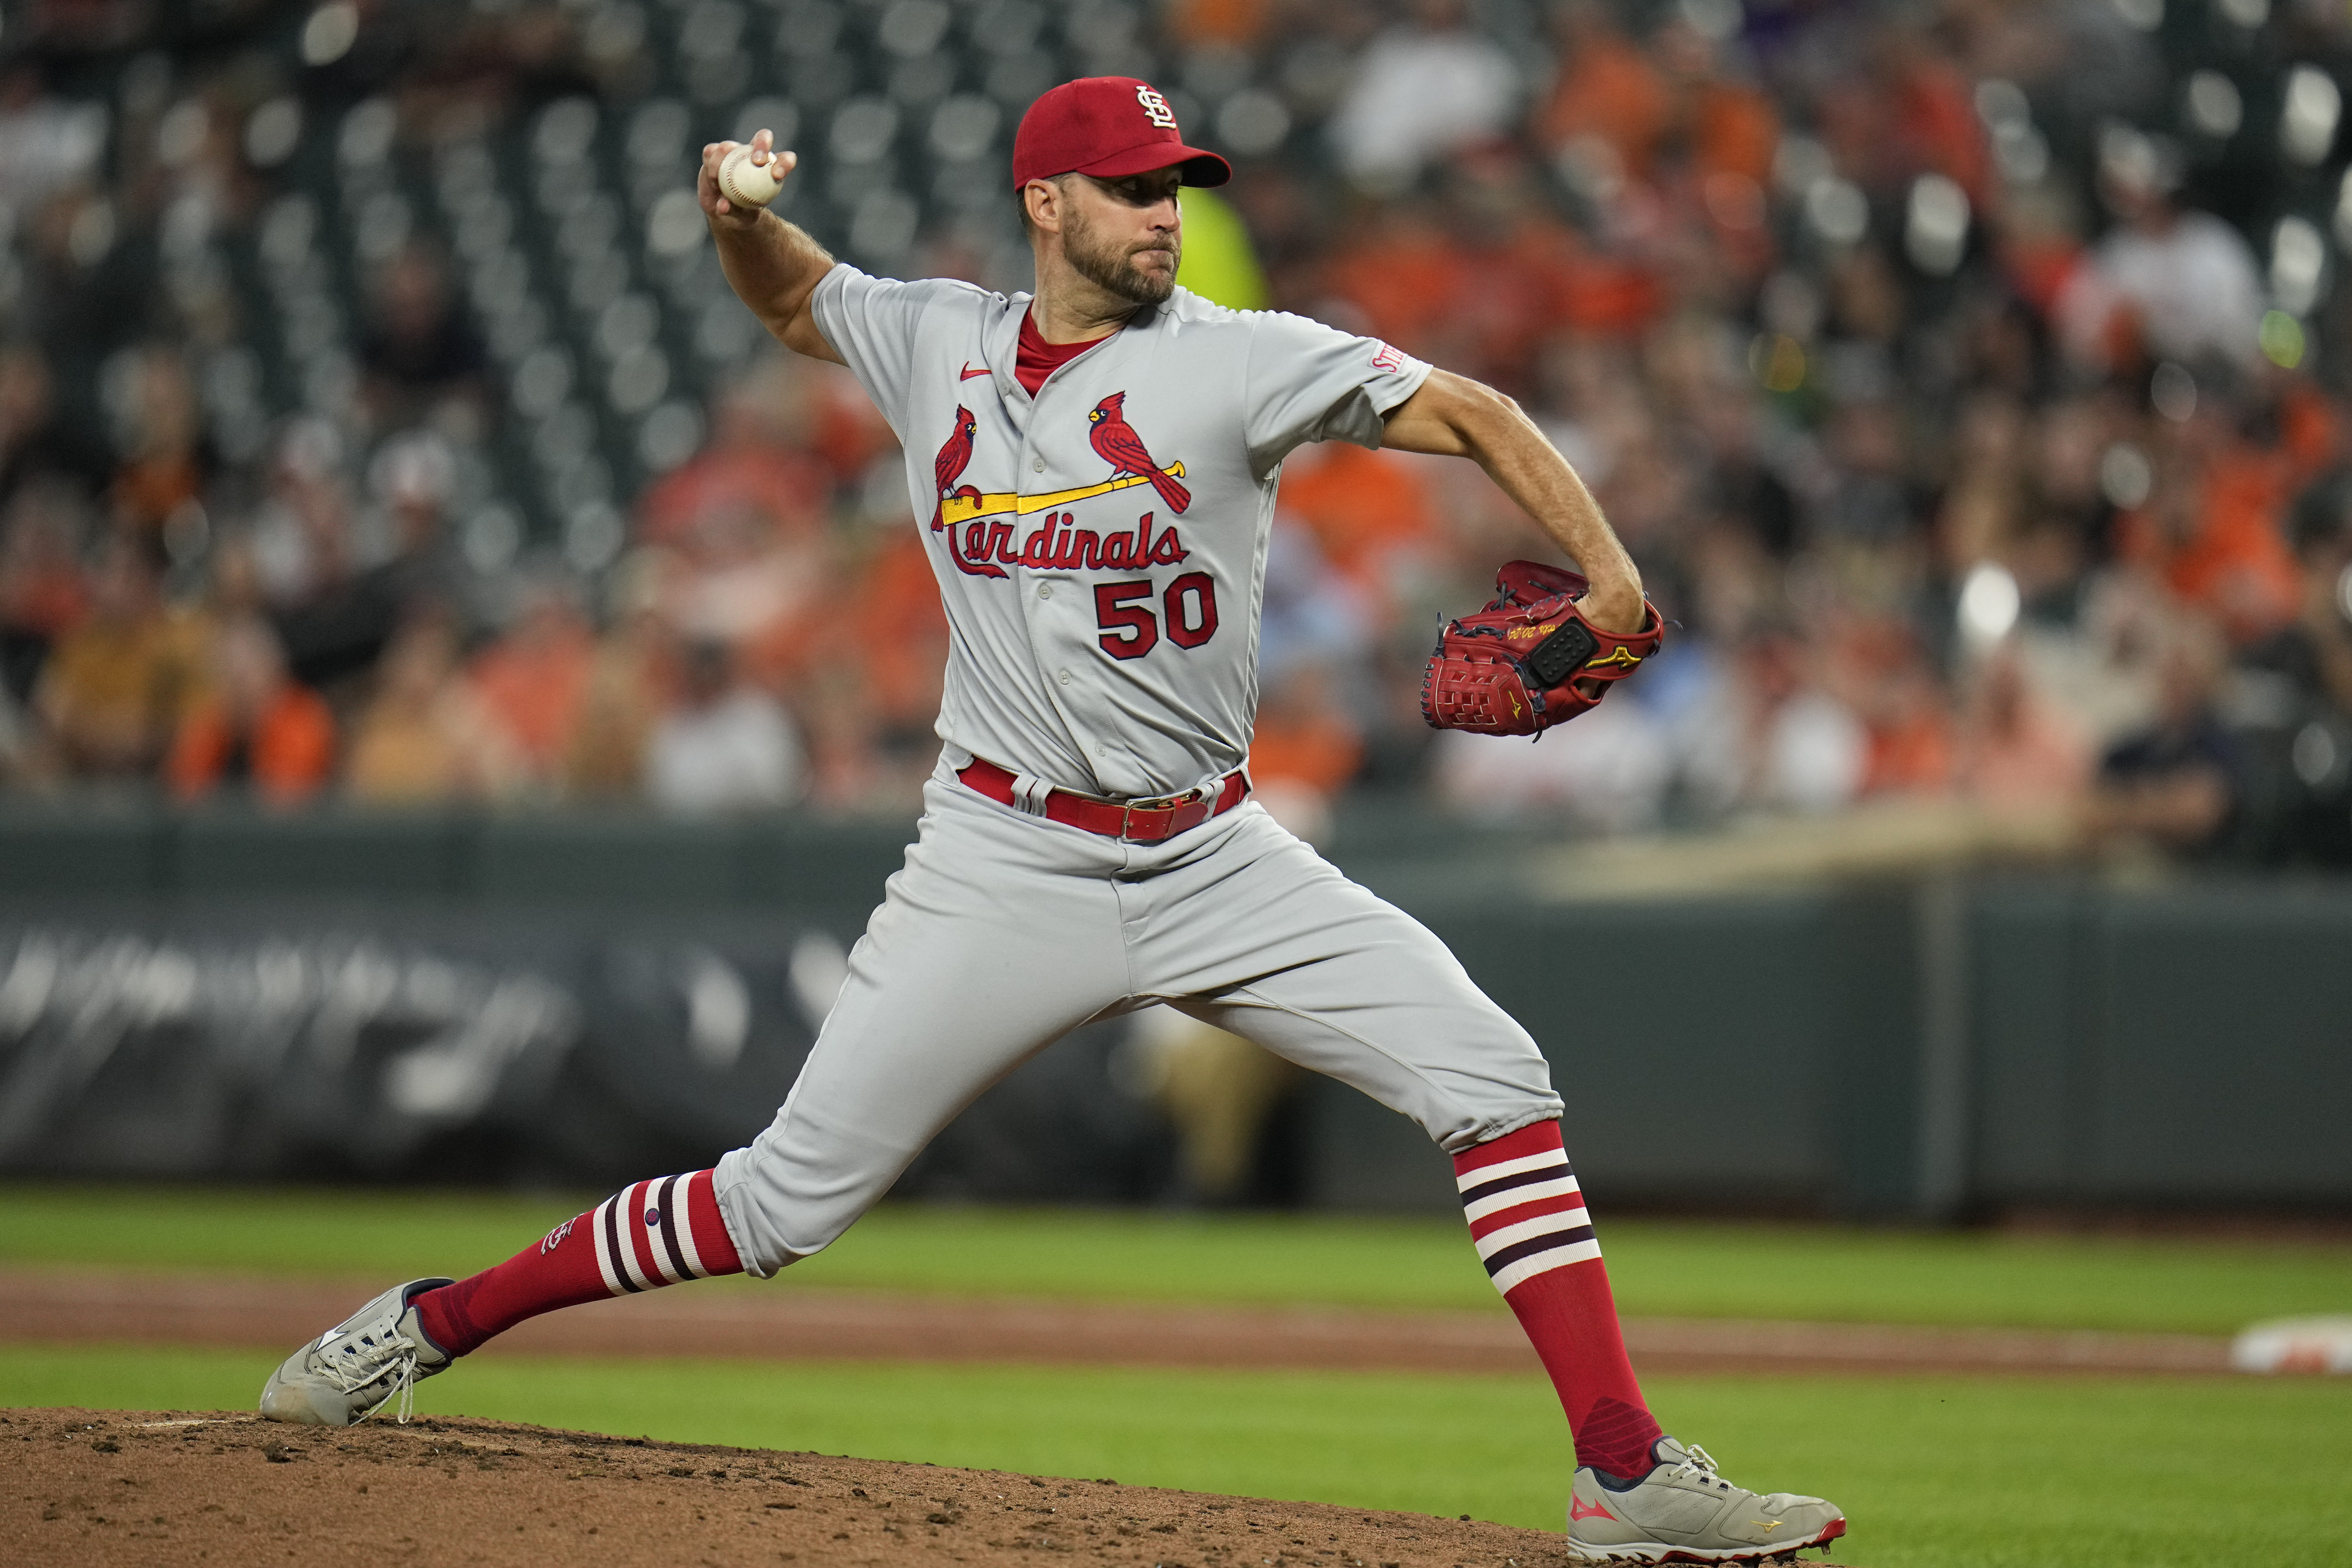 When Pressure Is on, So Is Wainwright - The New York Times